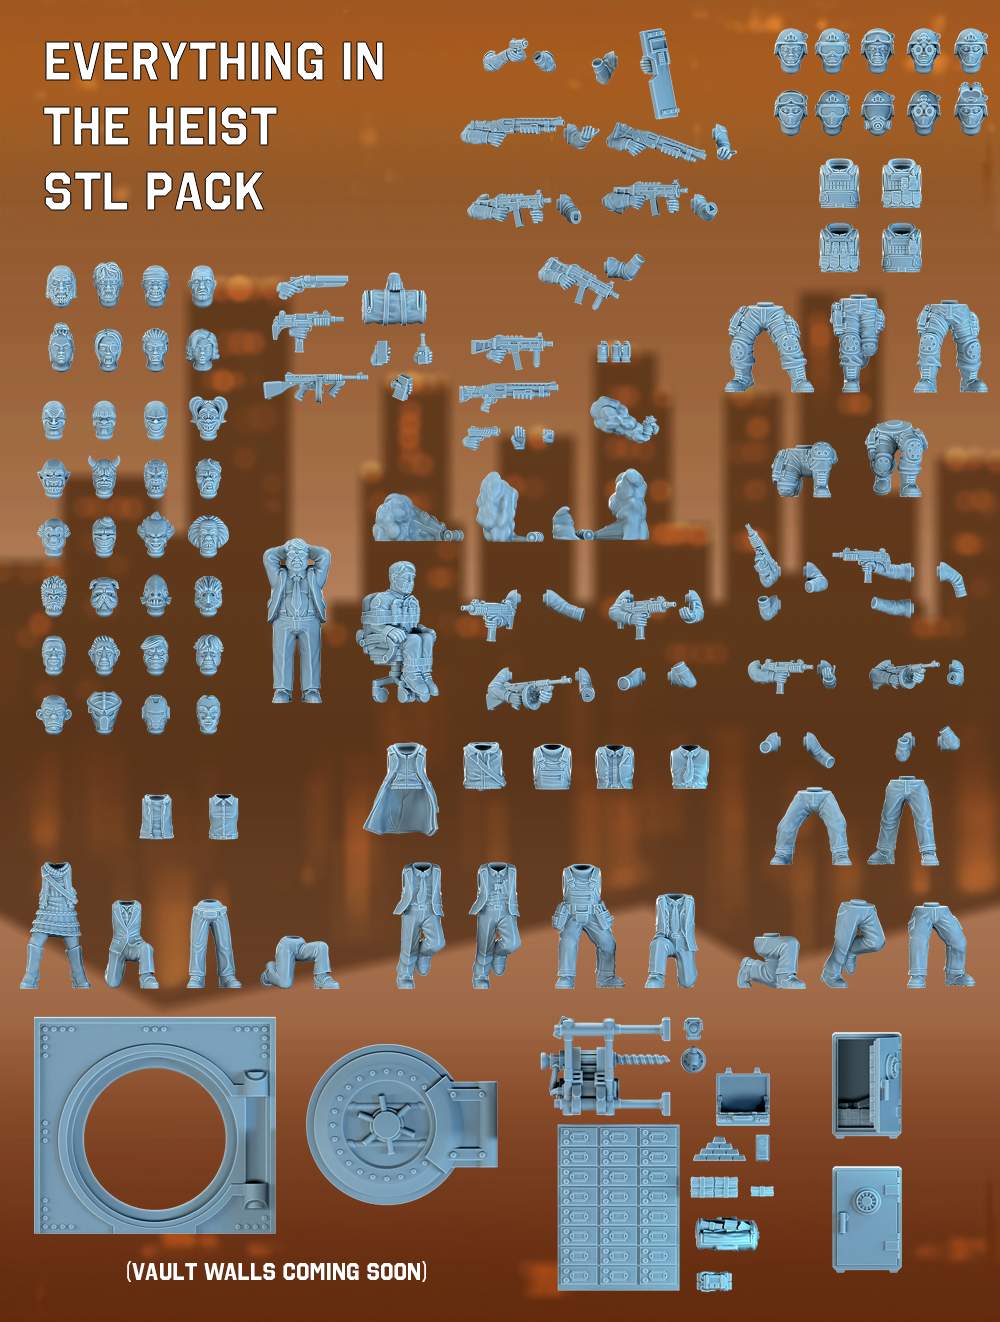 The Heist STL Pack's Cover